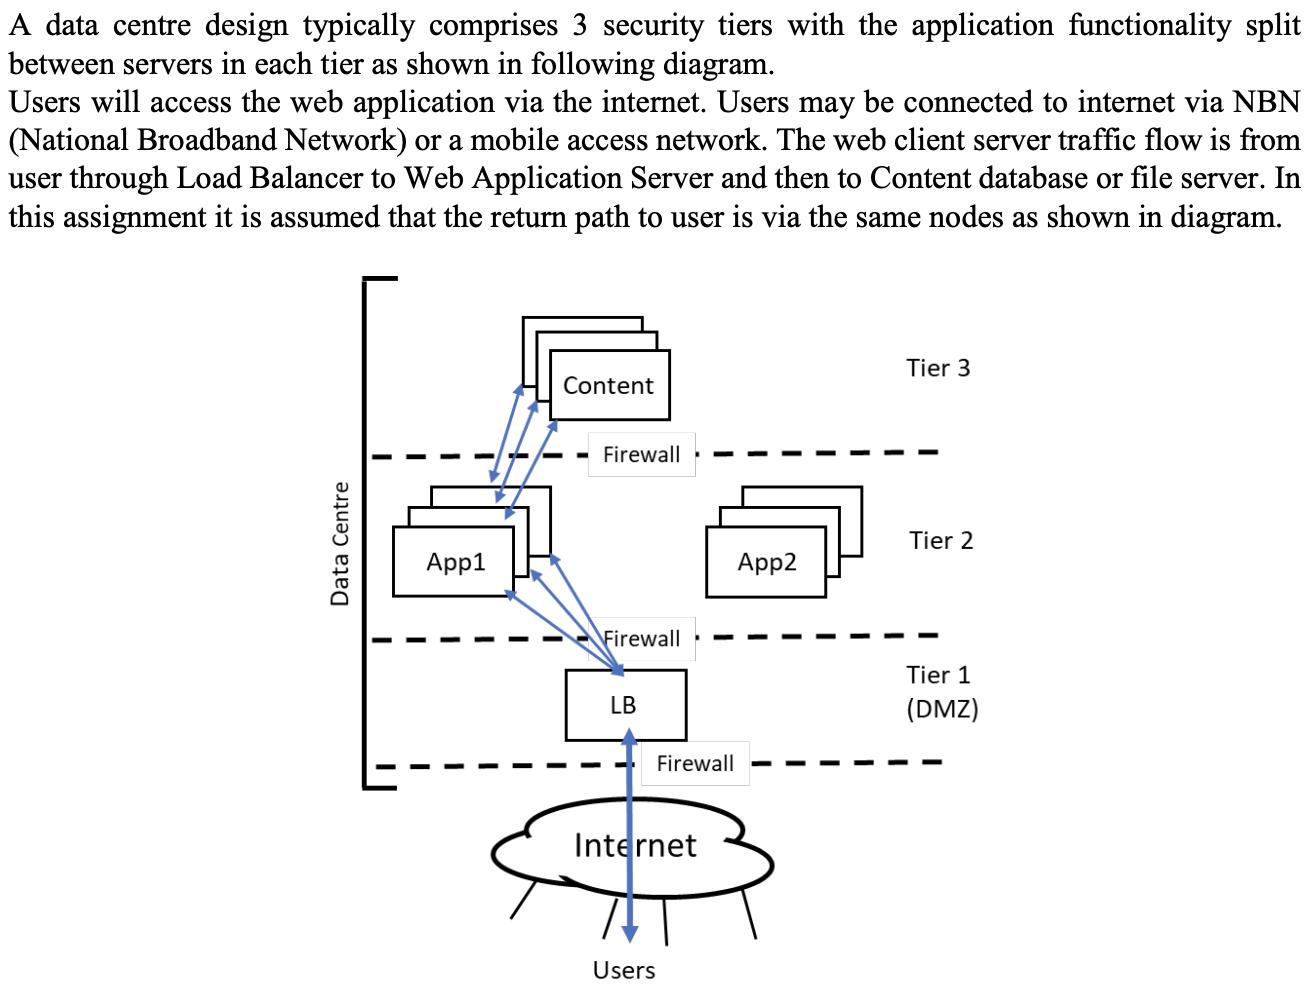 A data centre design typically comprises 3 security tiers with the application functionality split between